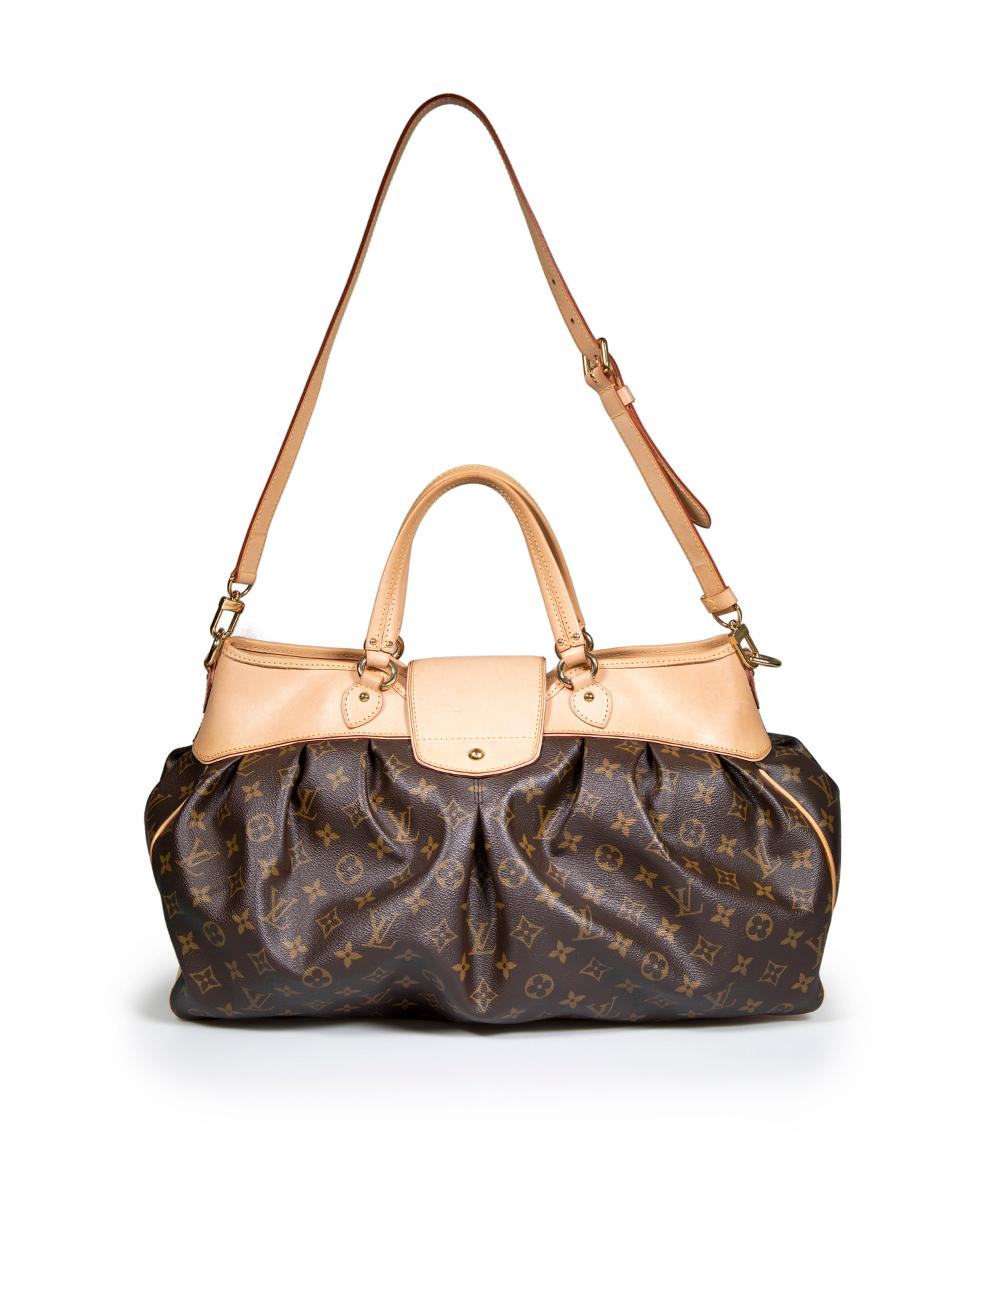 Louis Vuitton 2009 Brown Monogram Boetie GM Bag In Good Condition For Sale In London, GB